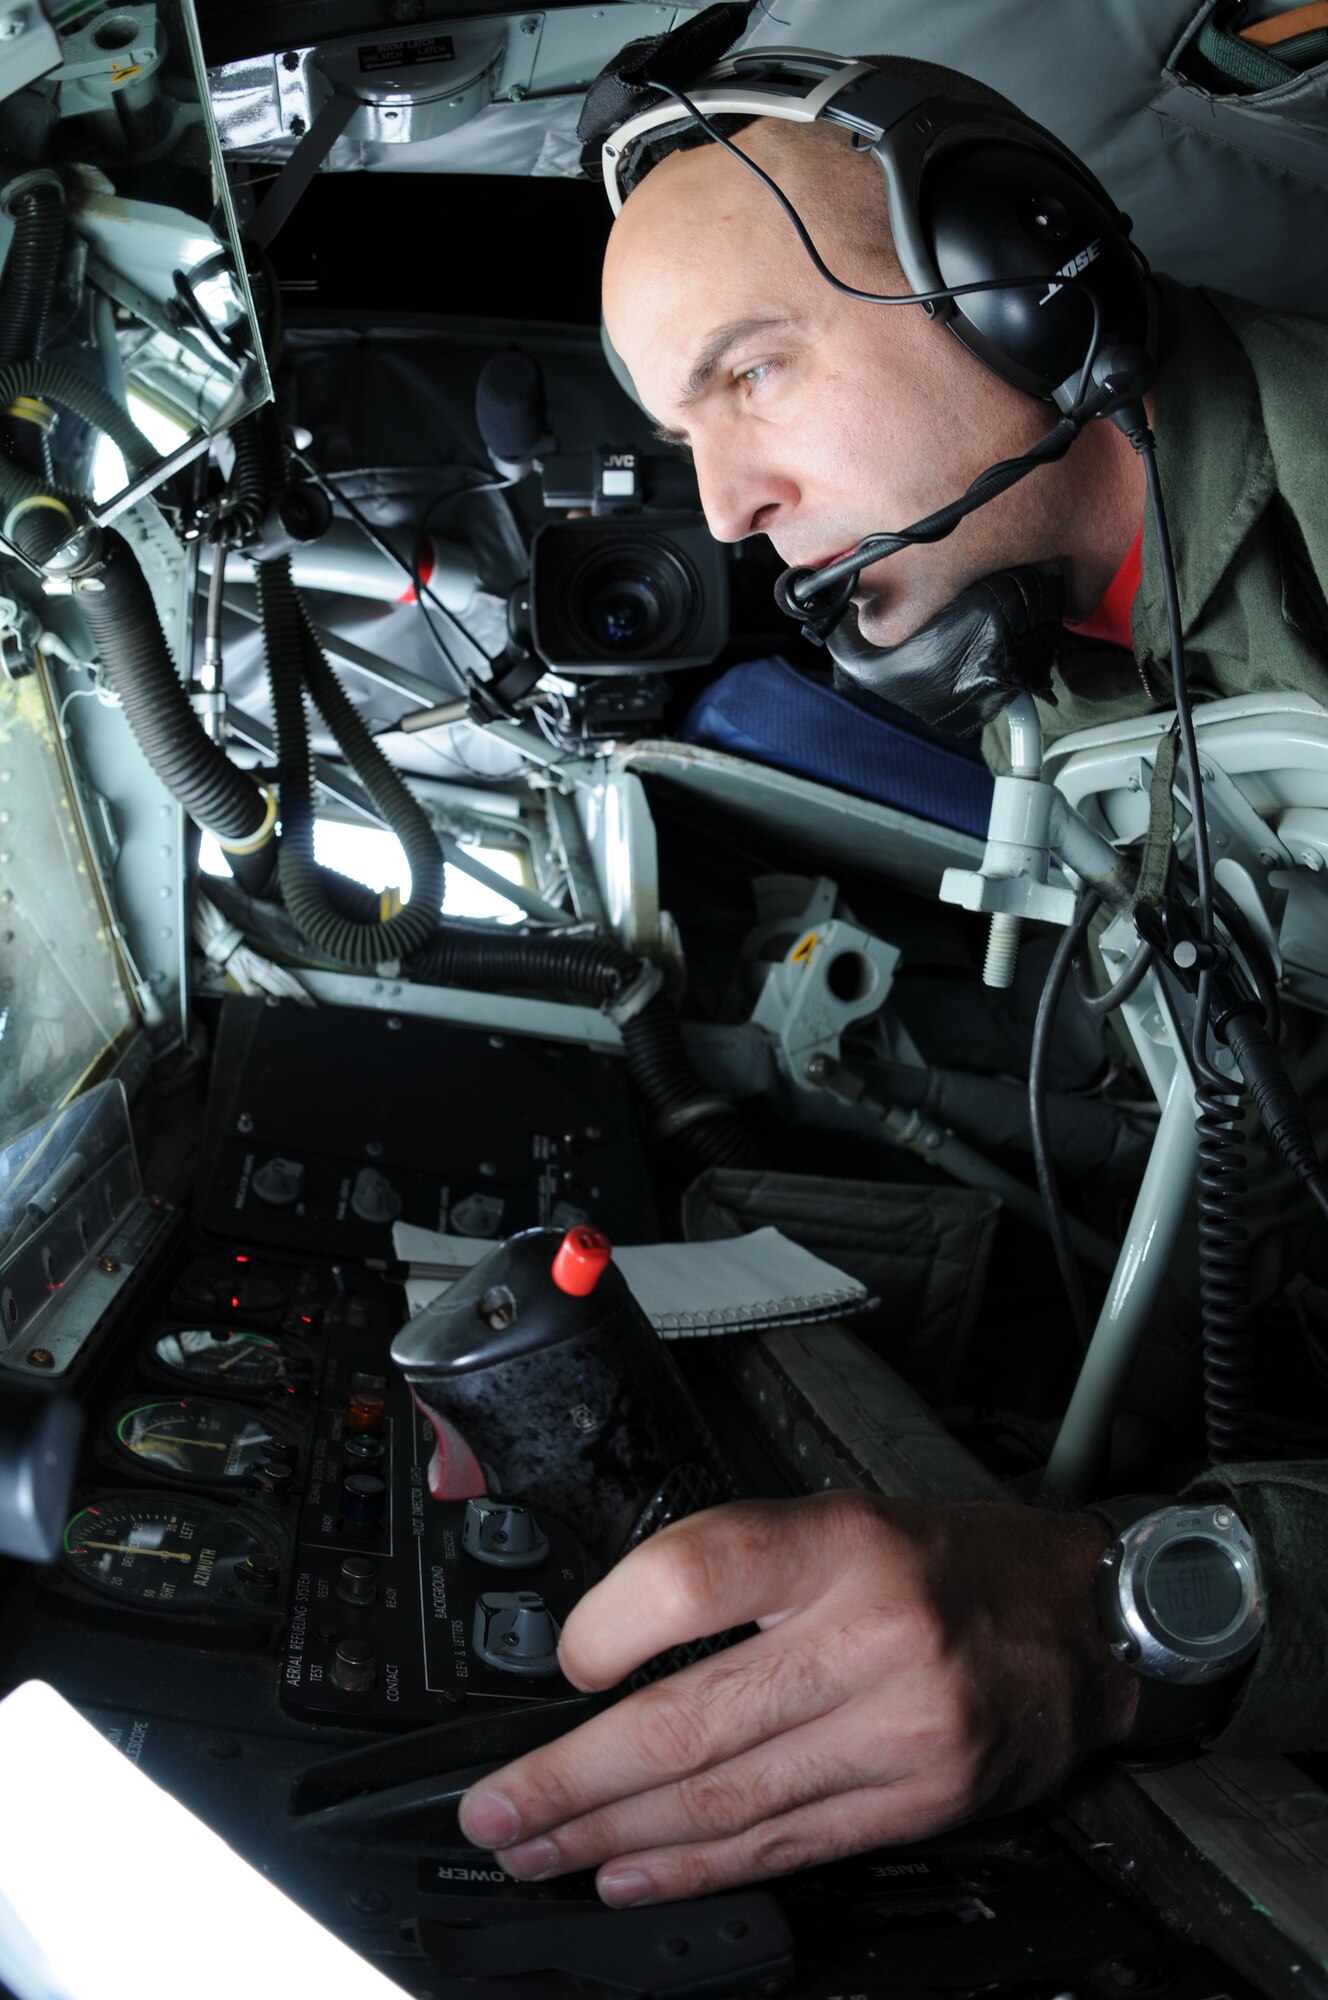 Master Sgt. Bill Fitch, 351st Air Refueling Squadron chief boom operator, refuels an MC-130P Combat Shadow from a 100th Air Refueling Wing KC-135 over the Atlantic Ocean during a sea rescue mission June 26.  The two aircraft were part of a group of five from the United States and England which participated in a mission to pluck a sick man from a ship off the coast of Ireland and deliver him to a medical treatment facility.  (U.S. Air Force photo by Staff Sgt. Austin M. May)